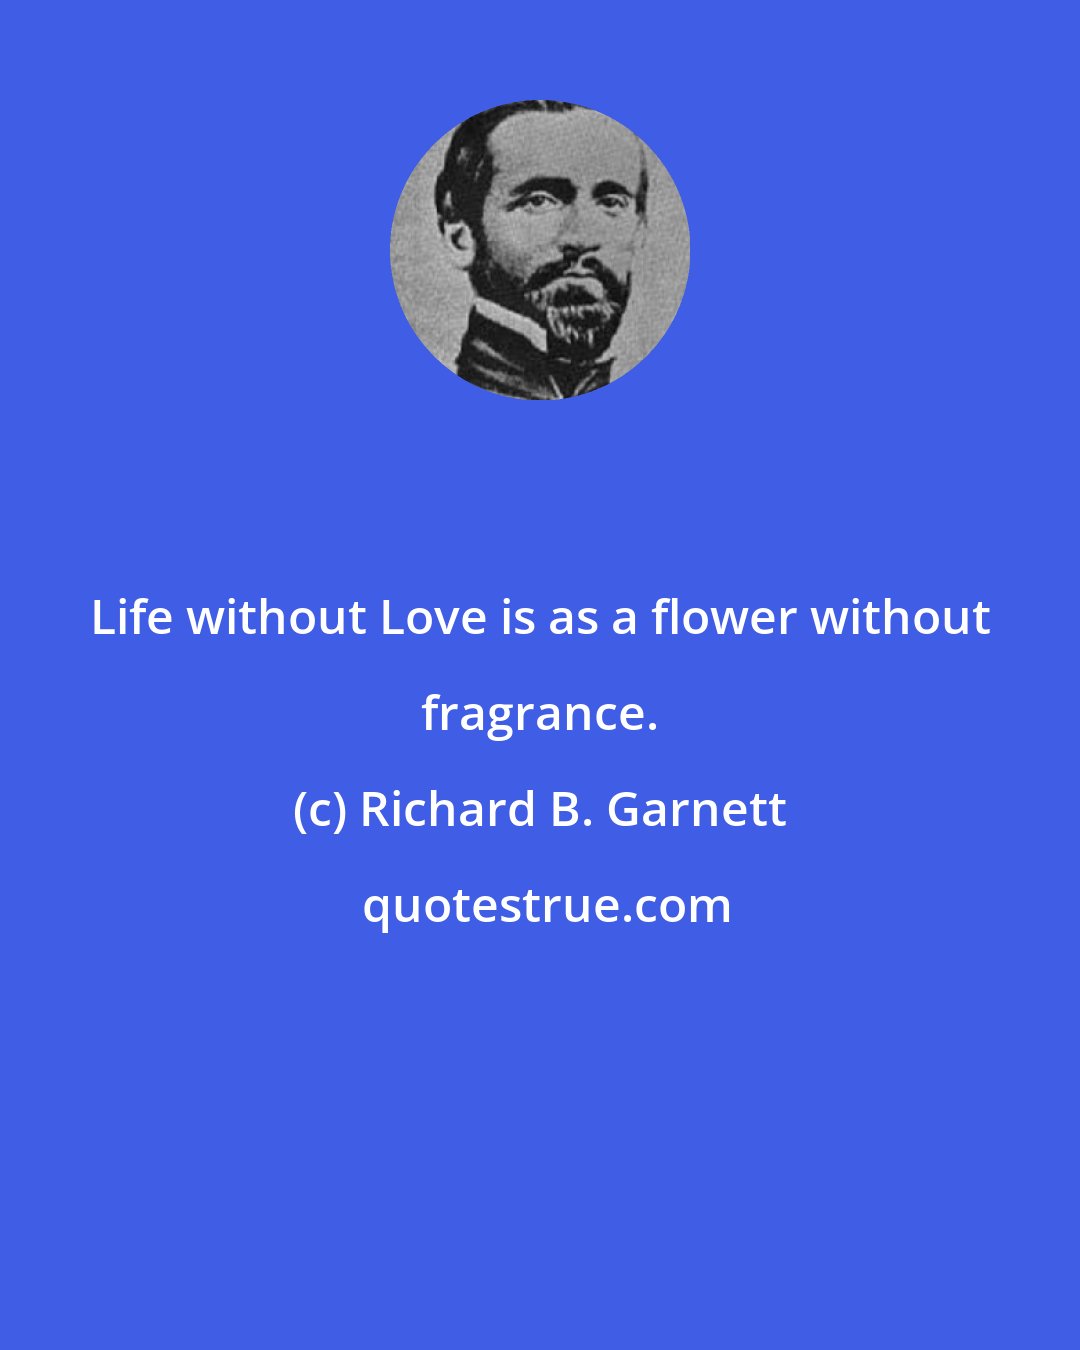 Richard B. Garnett: Life without Love is as a flower without fragrance.